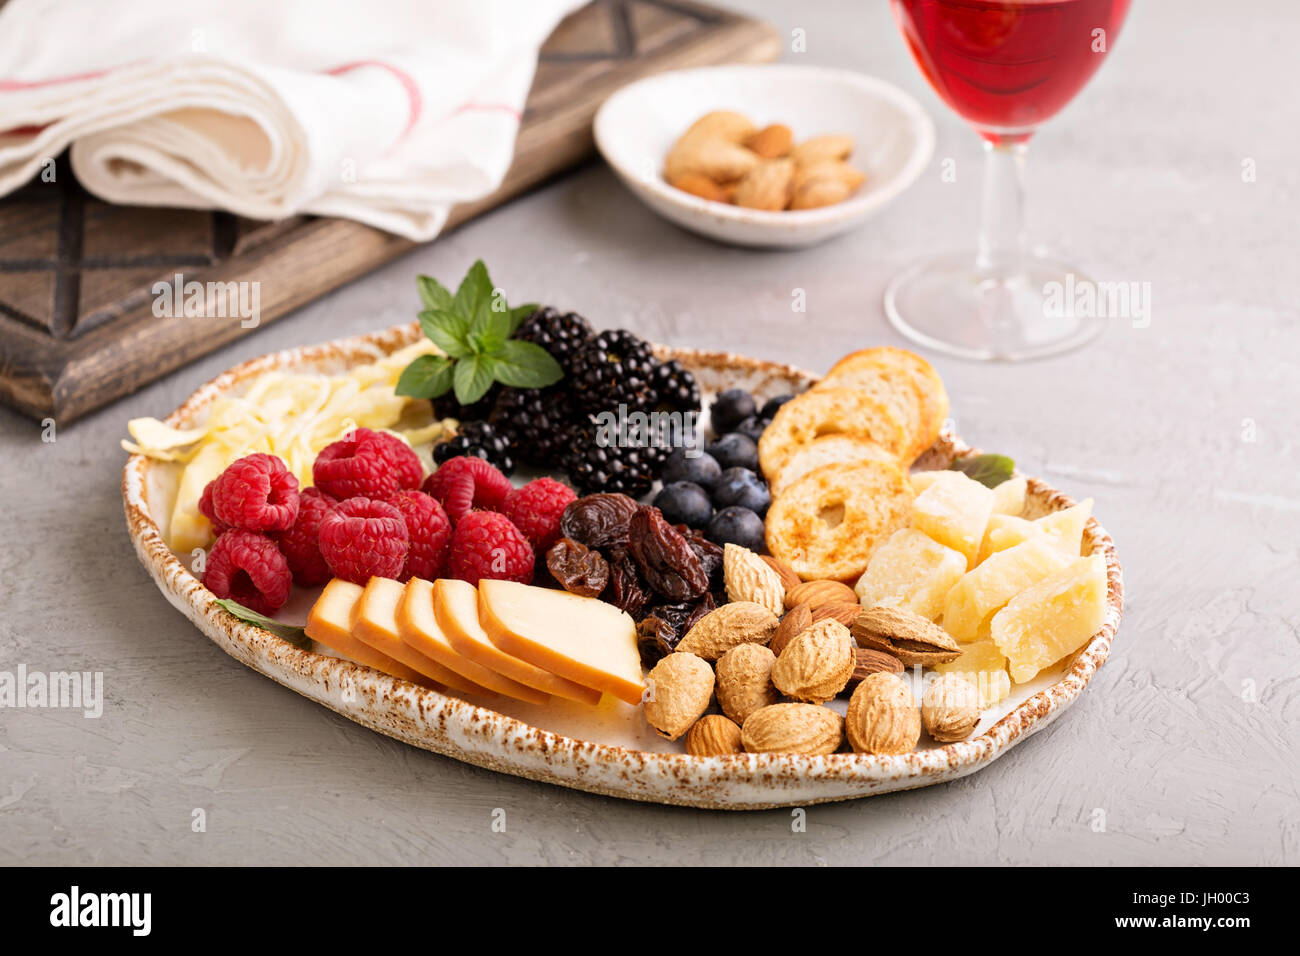 Cheese plate with nuts and berries Stock Photo